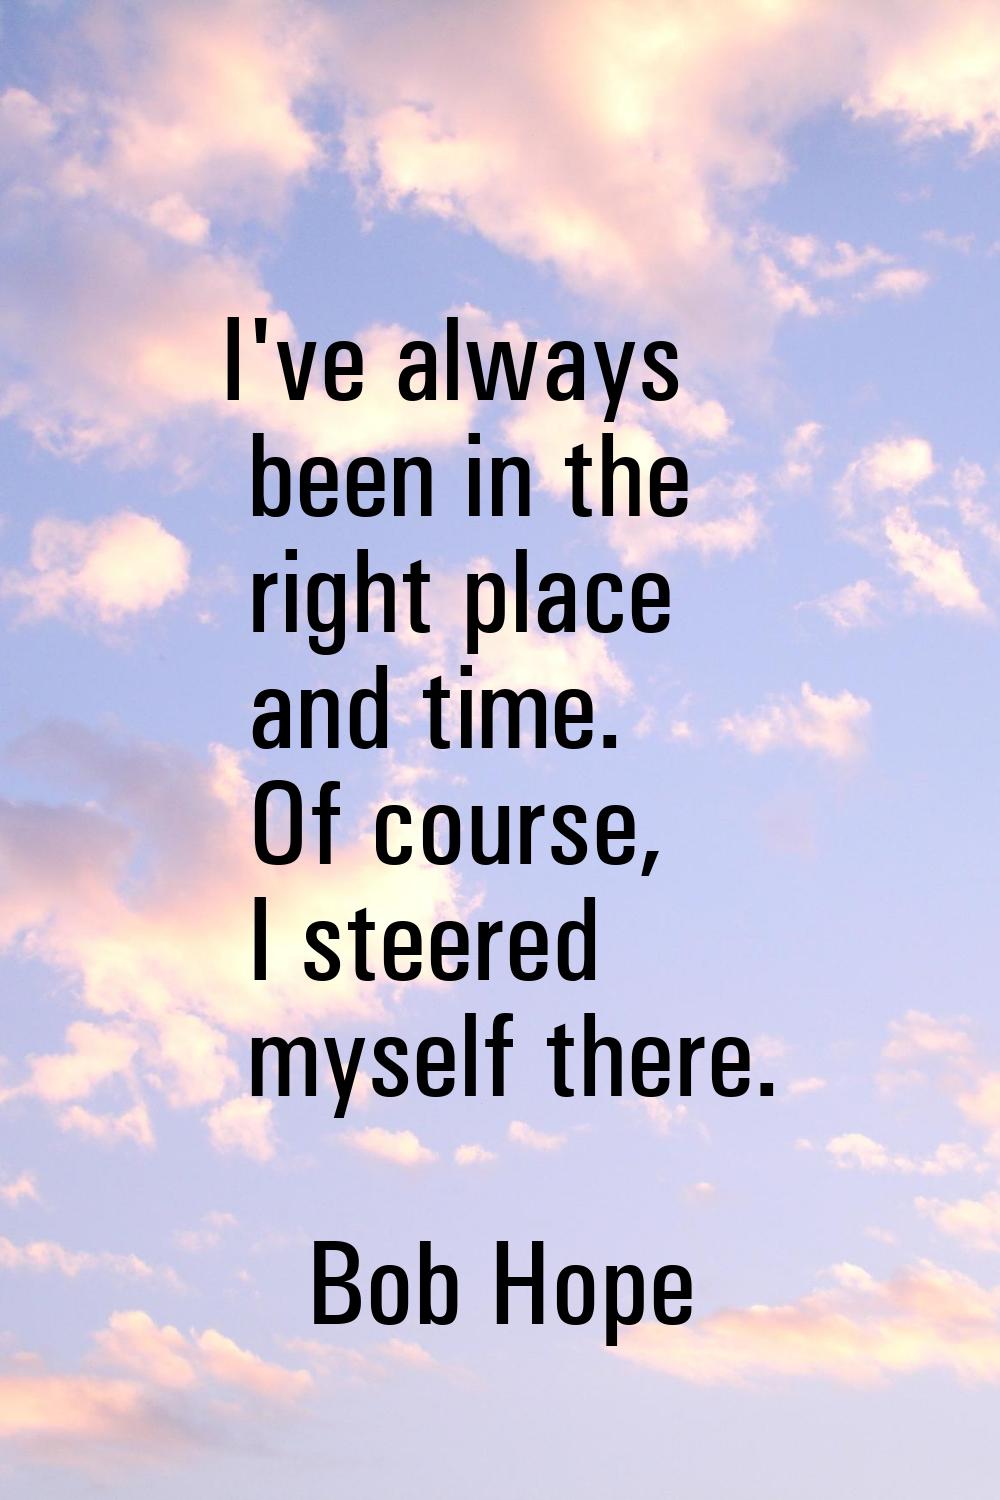 I've always been in the right place and time. Of course, I steered myself there.